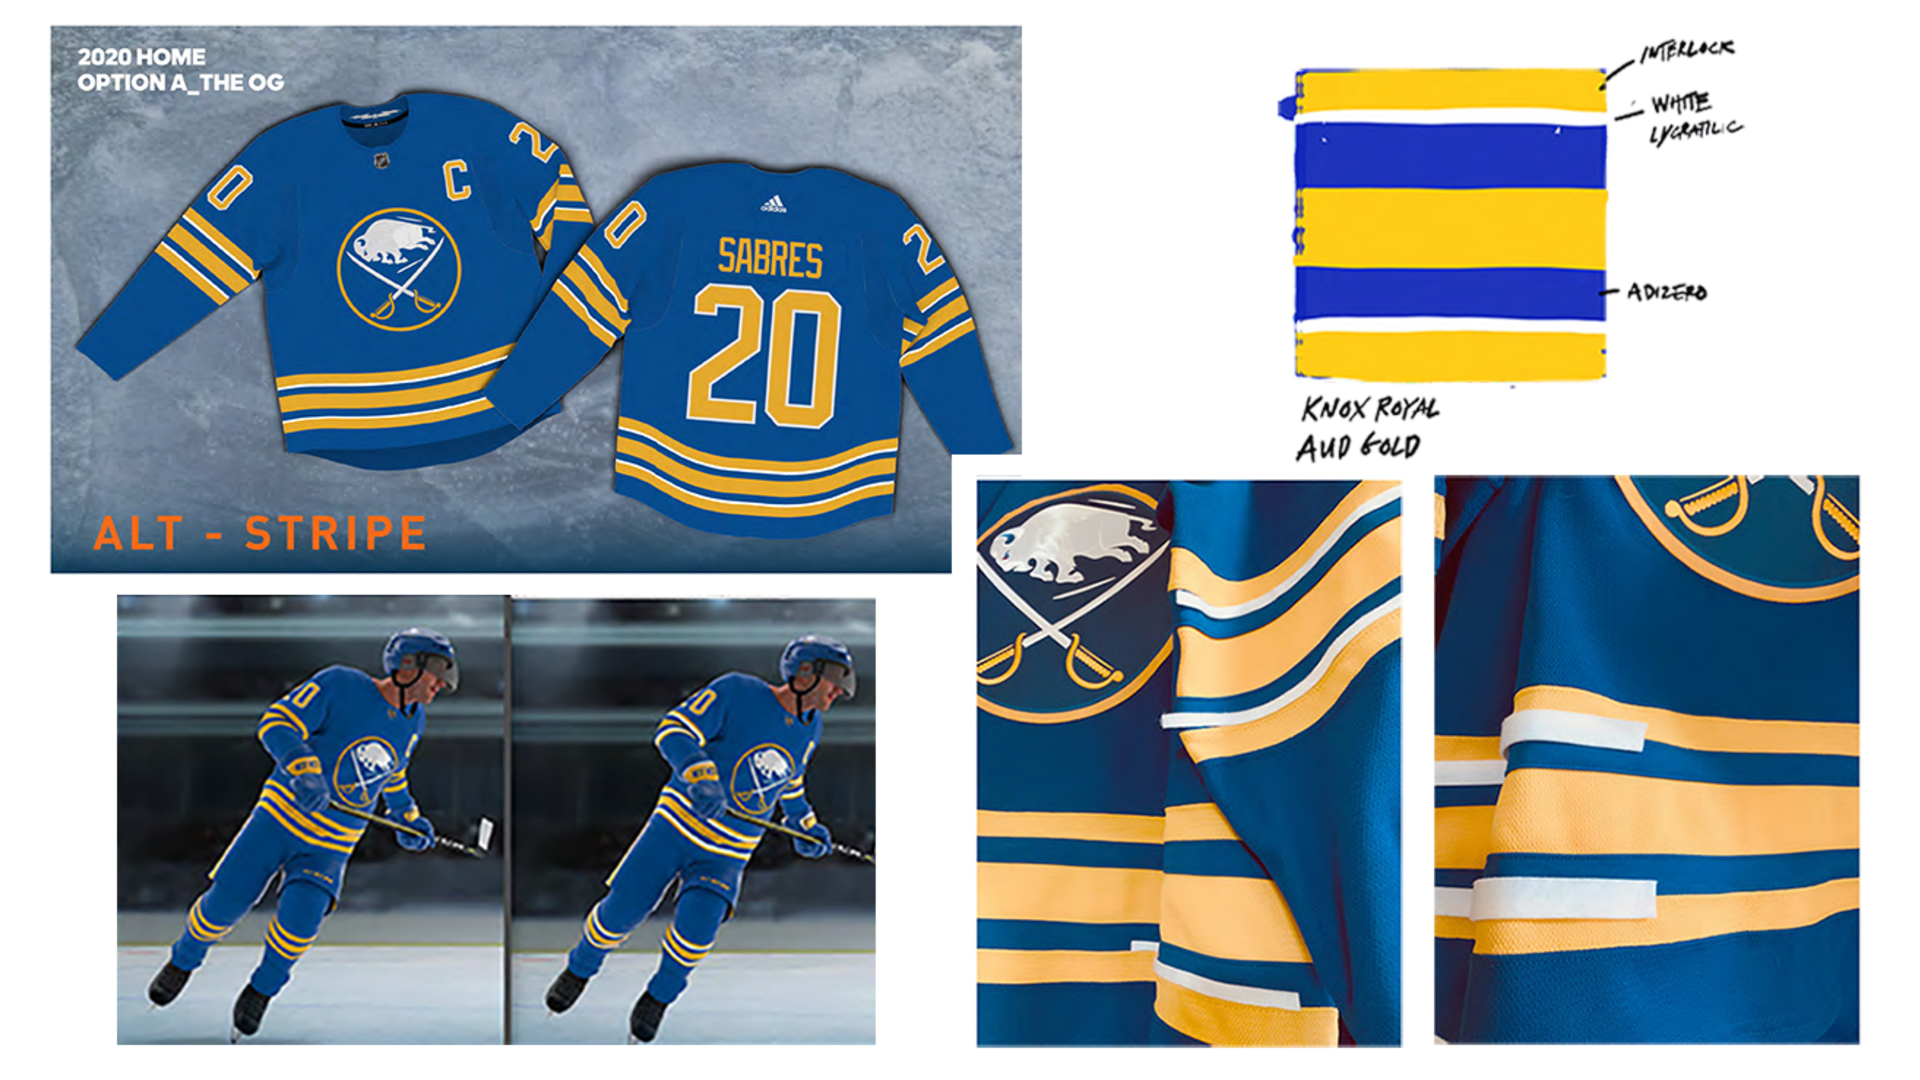 The Jersey History of the Buffalo Sabres 